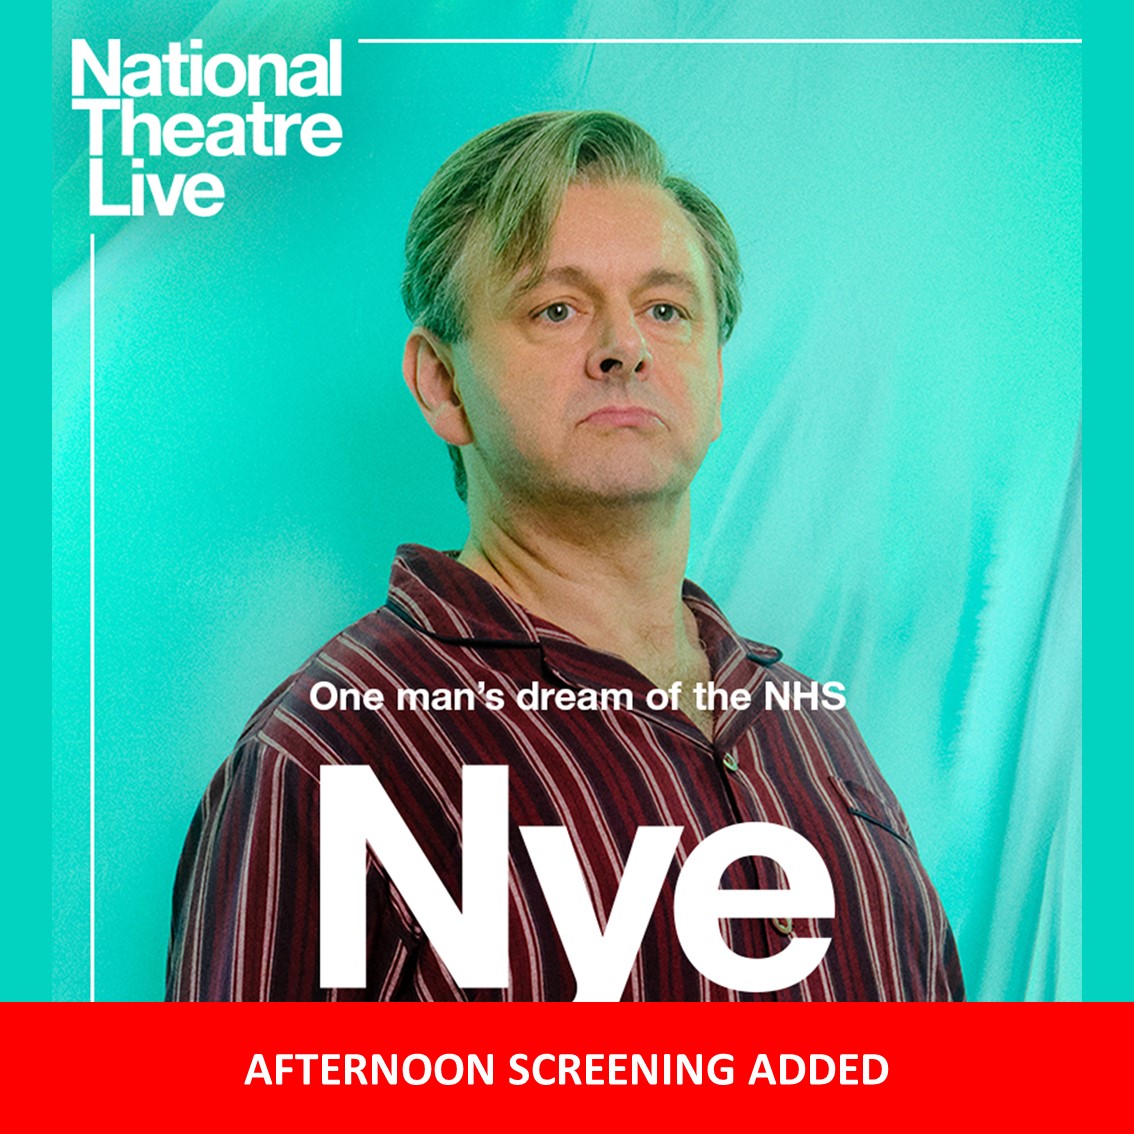 Nye, a new play by Tim Price and directed by Rufus Norris will be shown on our big screen on 16 May at 2pm cranleigharts.org/event/nt-live-… Michael Sheen plays Nye Bevan in a surreal and spectacular journey through the life and legacy of the man who created the NHS. From @NationalTheatre